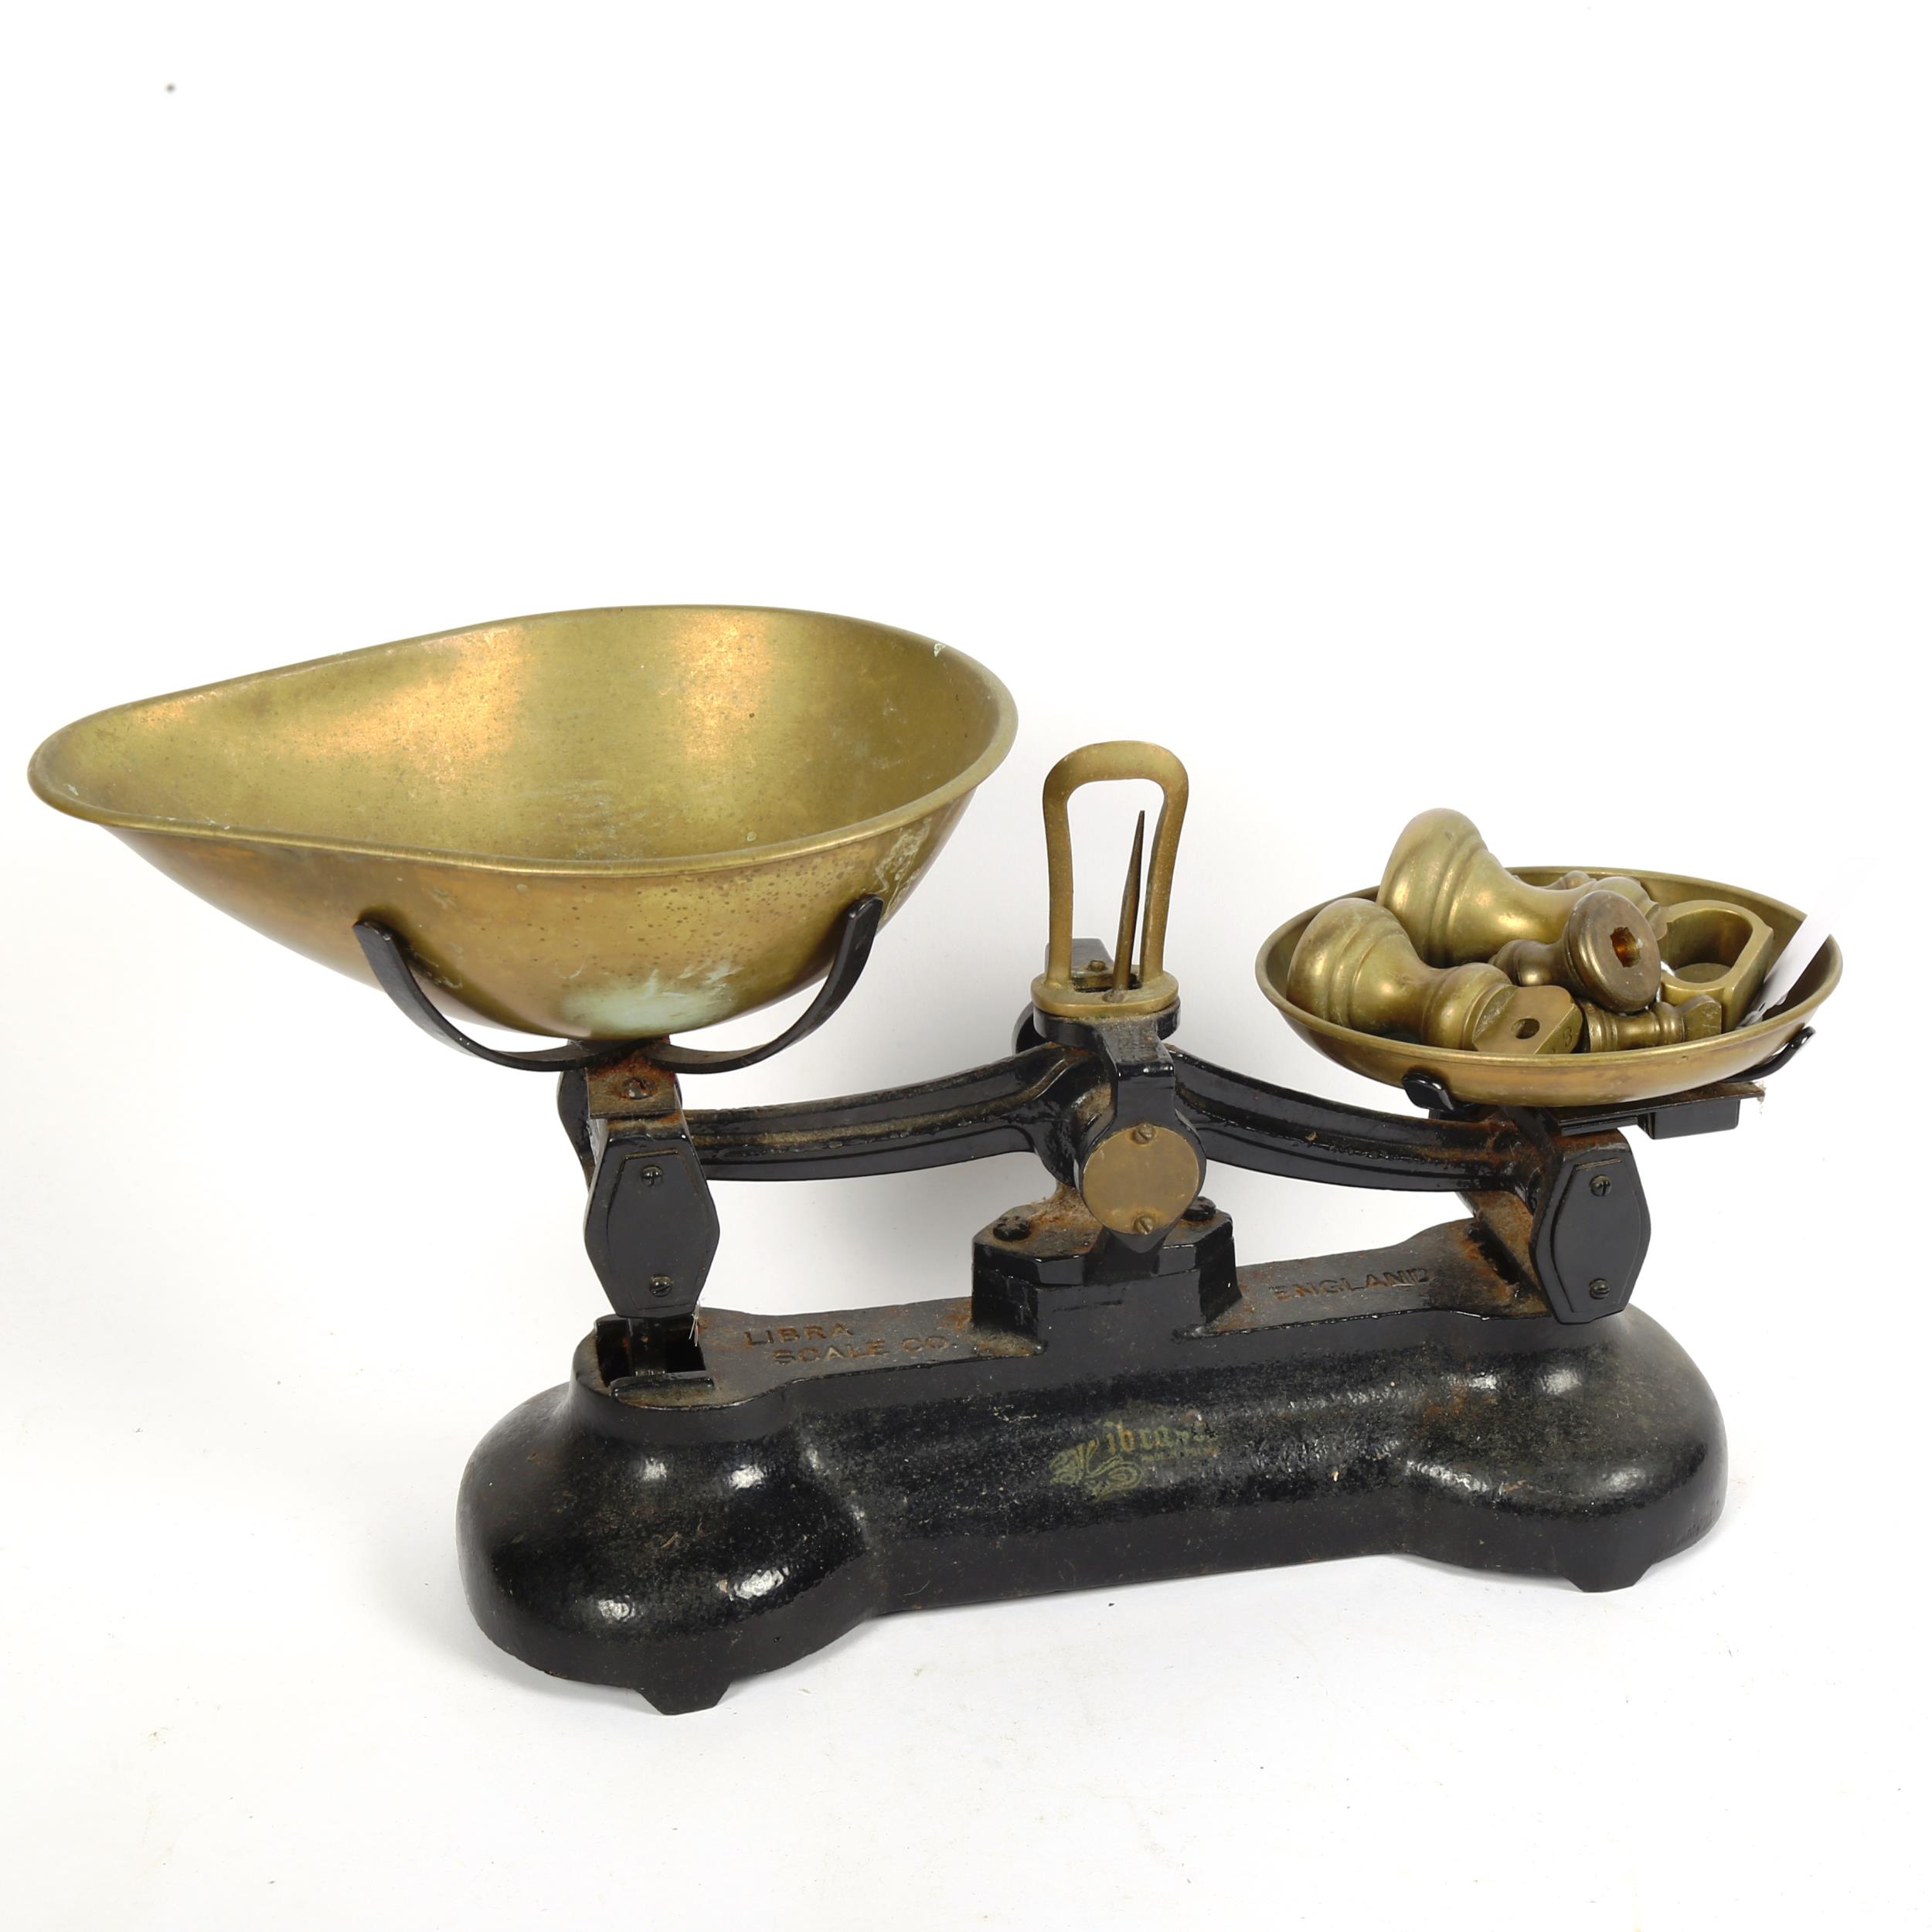 A pair of Libra cast-iron balance scales with weights, base length 32cm